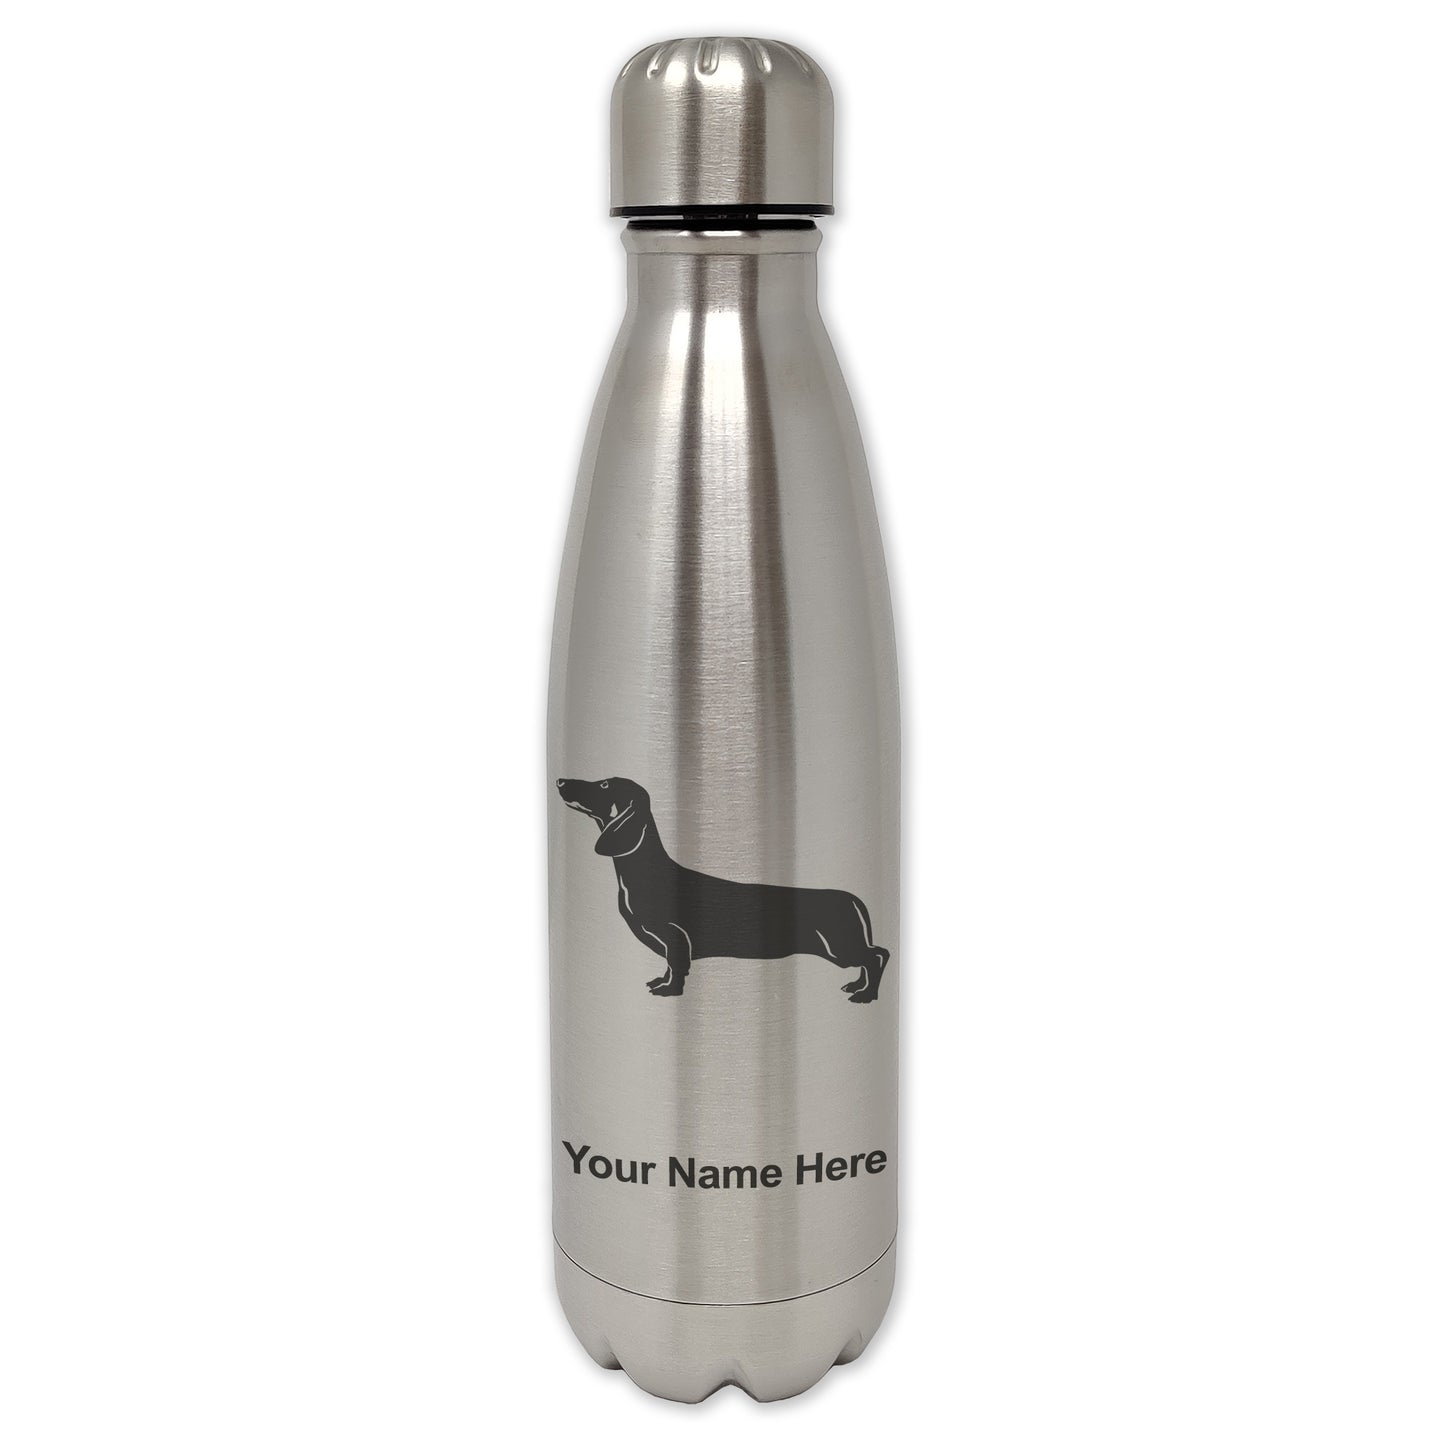 LaserGram Single Wall Water Bottle, Dachshund Dog, Personalized Engraving Included